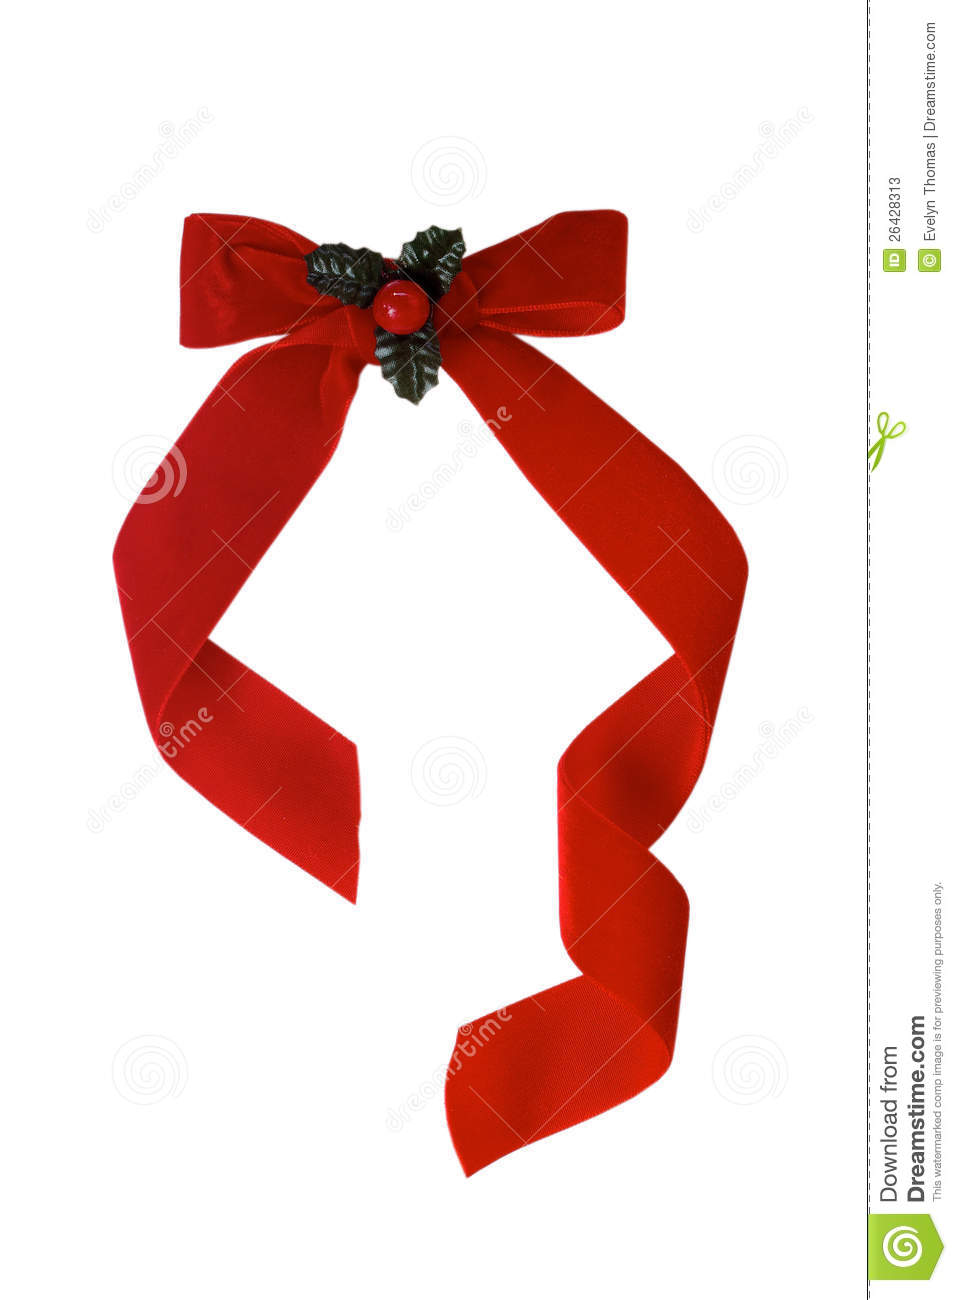 Velvet Ribbon And Bow With Holly For Christmas Isolated On A White